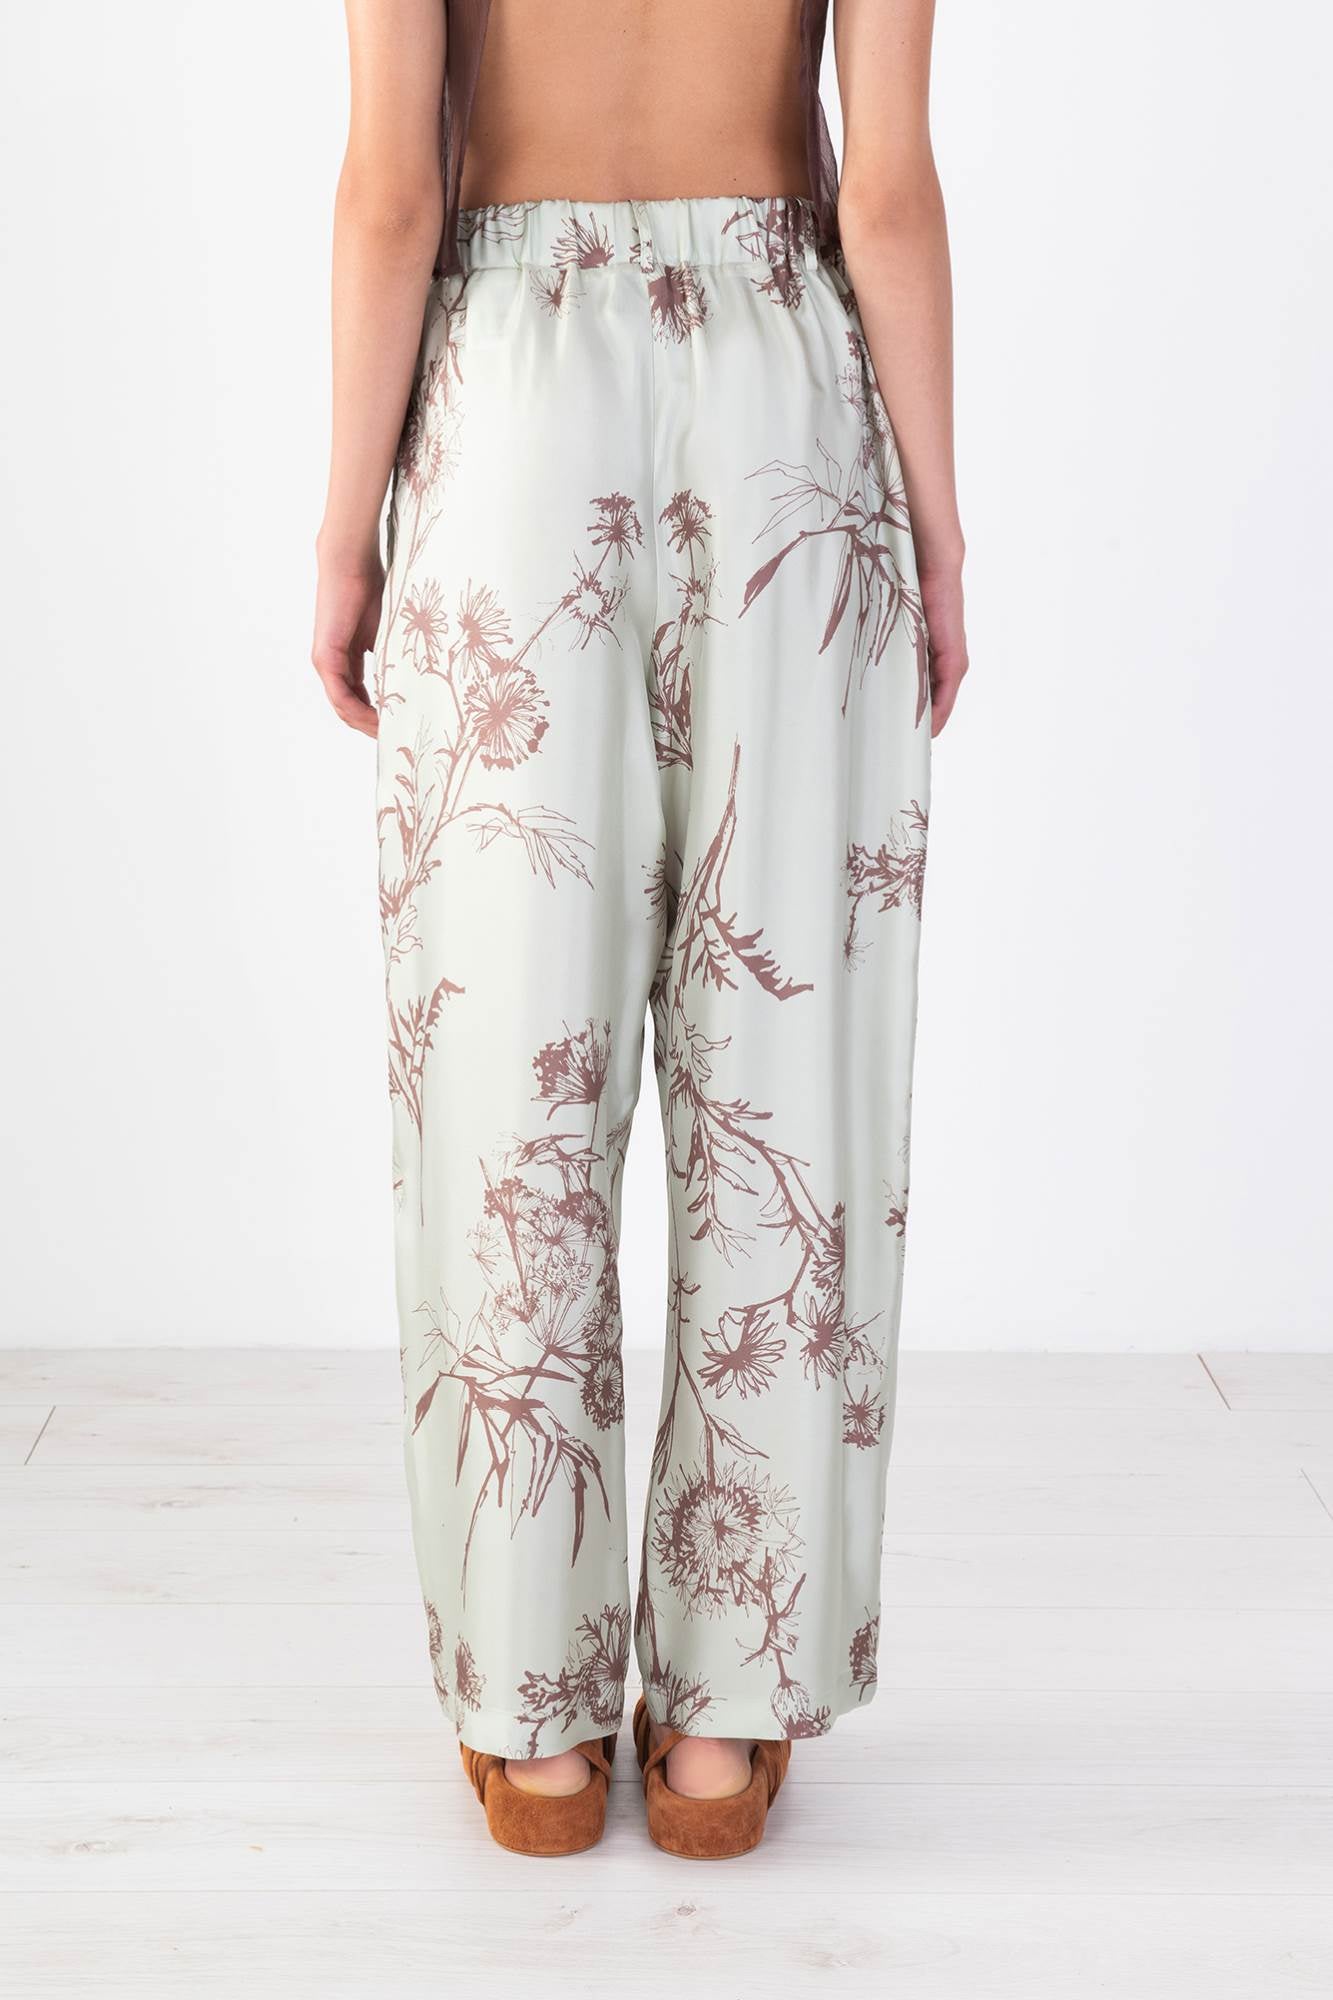 DOUBLE PENCE TROUSERS WITH “DANDY LION” PRINT